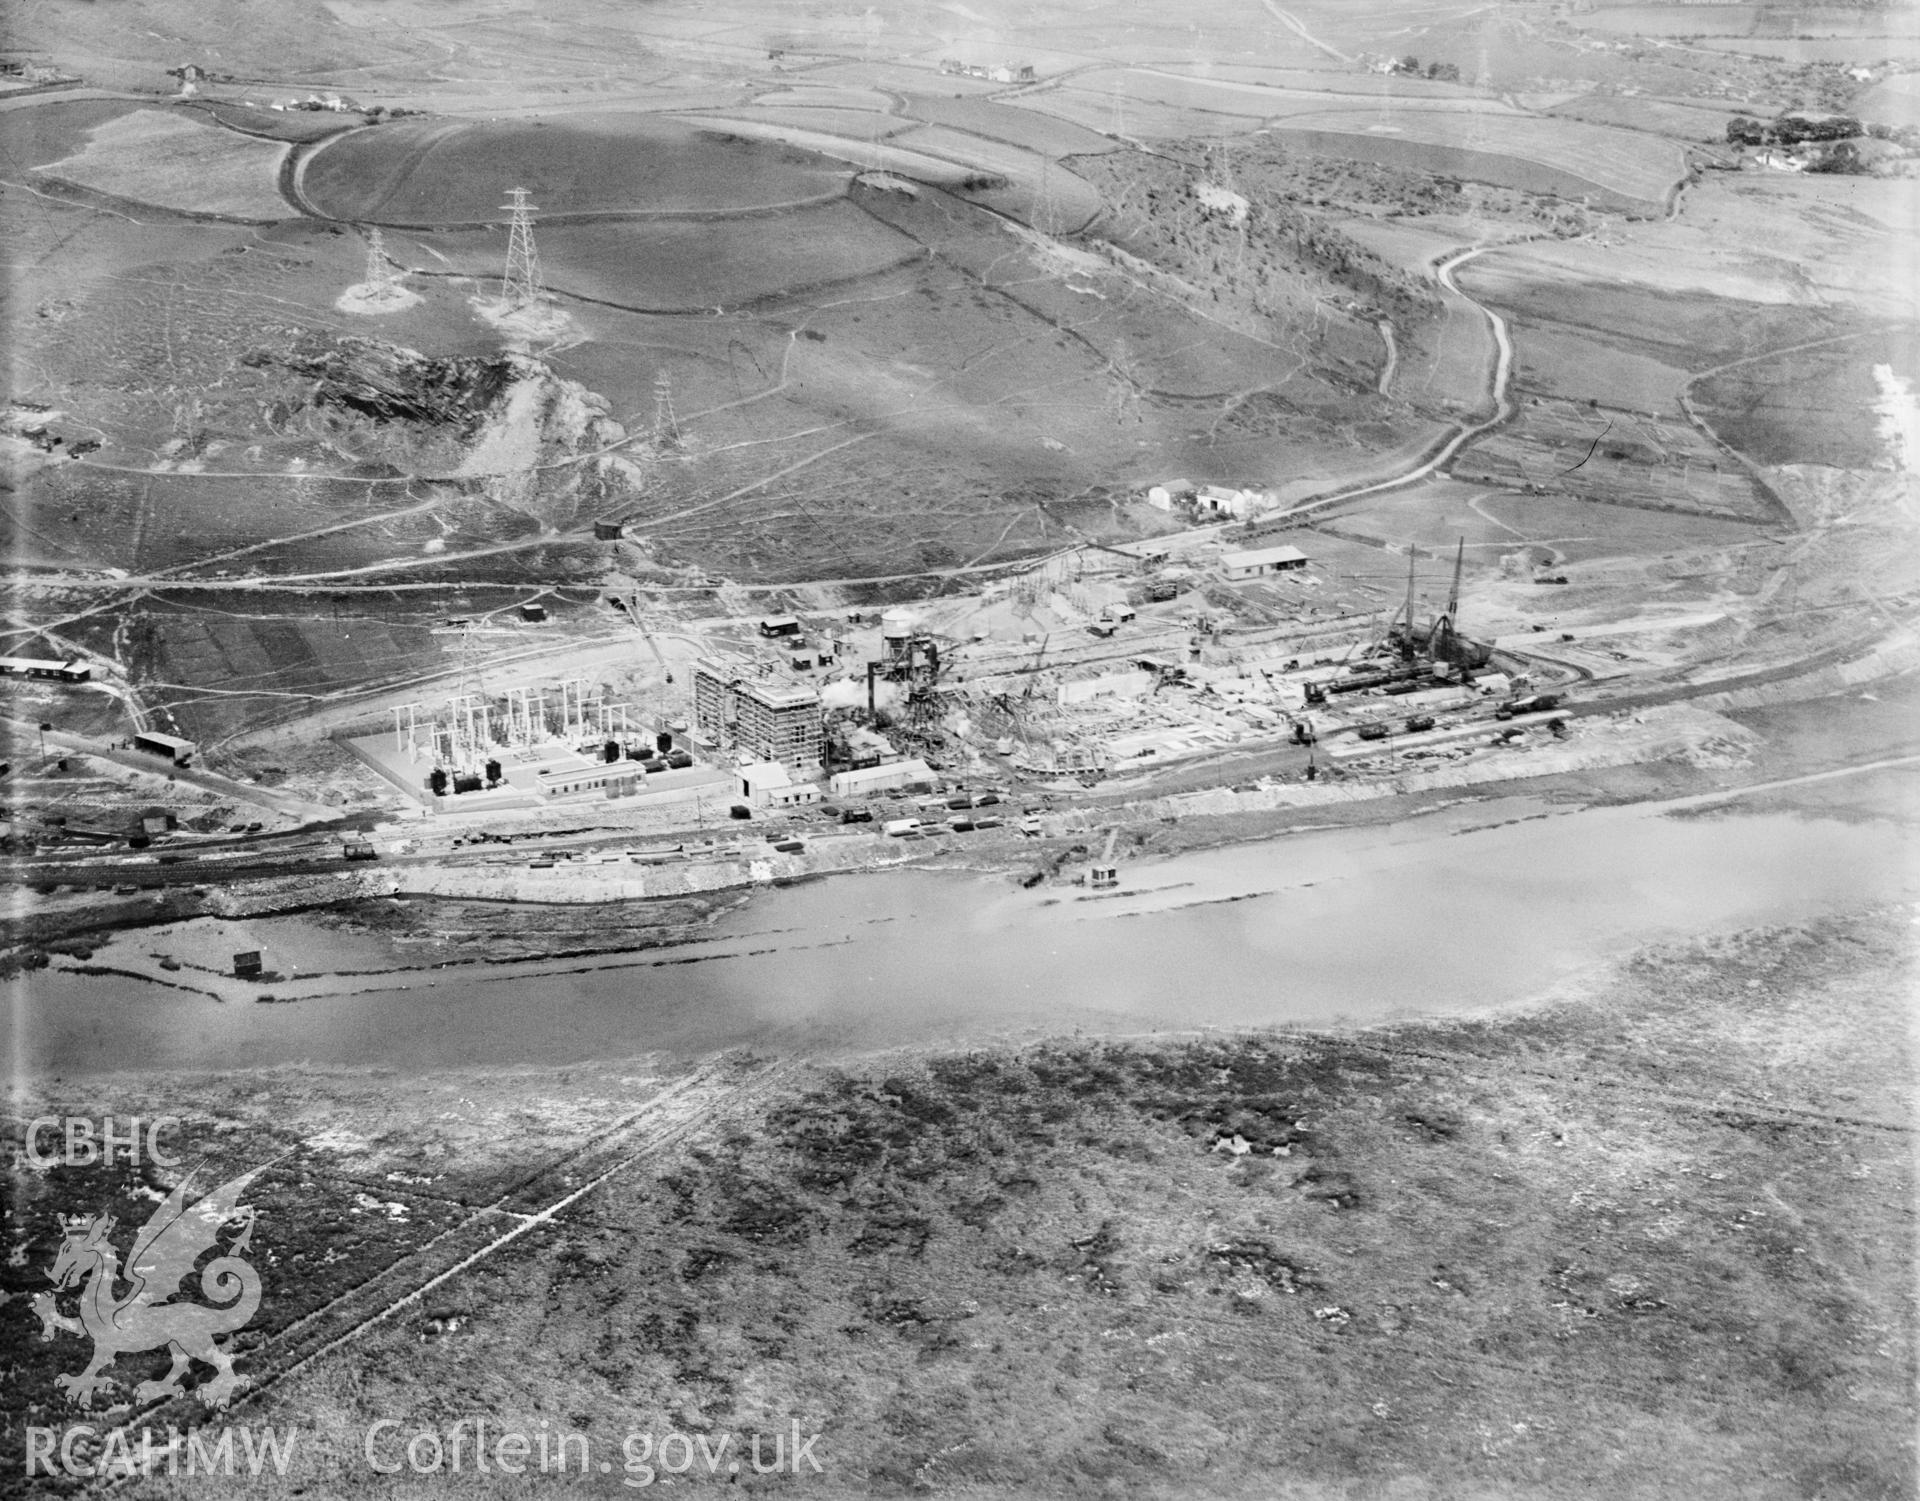 View of construction of Oil Refinery, Llandarcy, oblique aerial view. 5?x4? black and white glass plate negative.